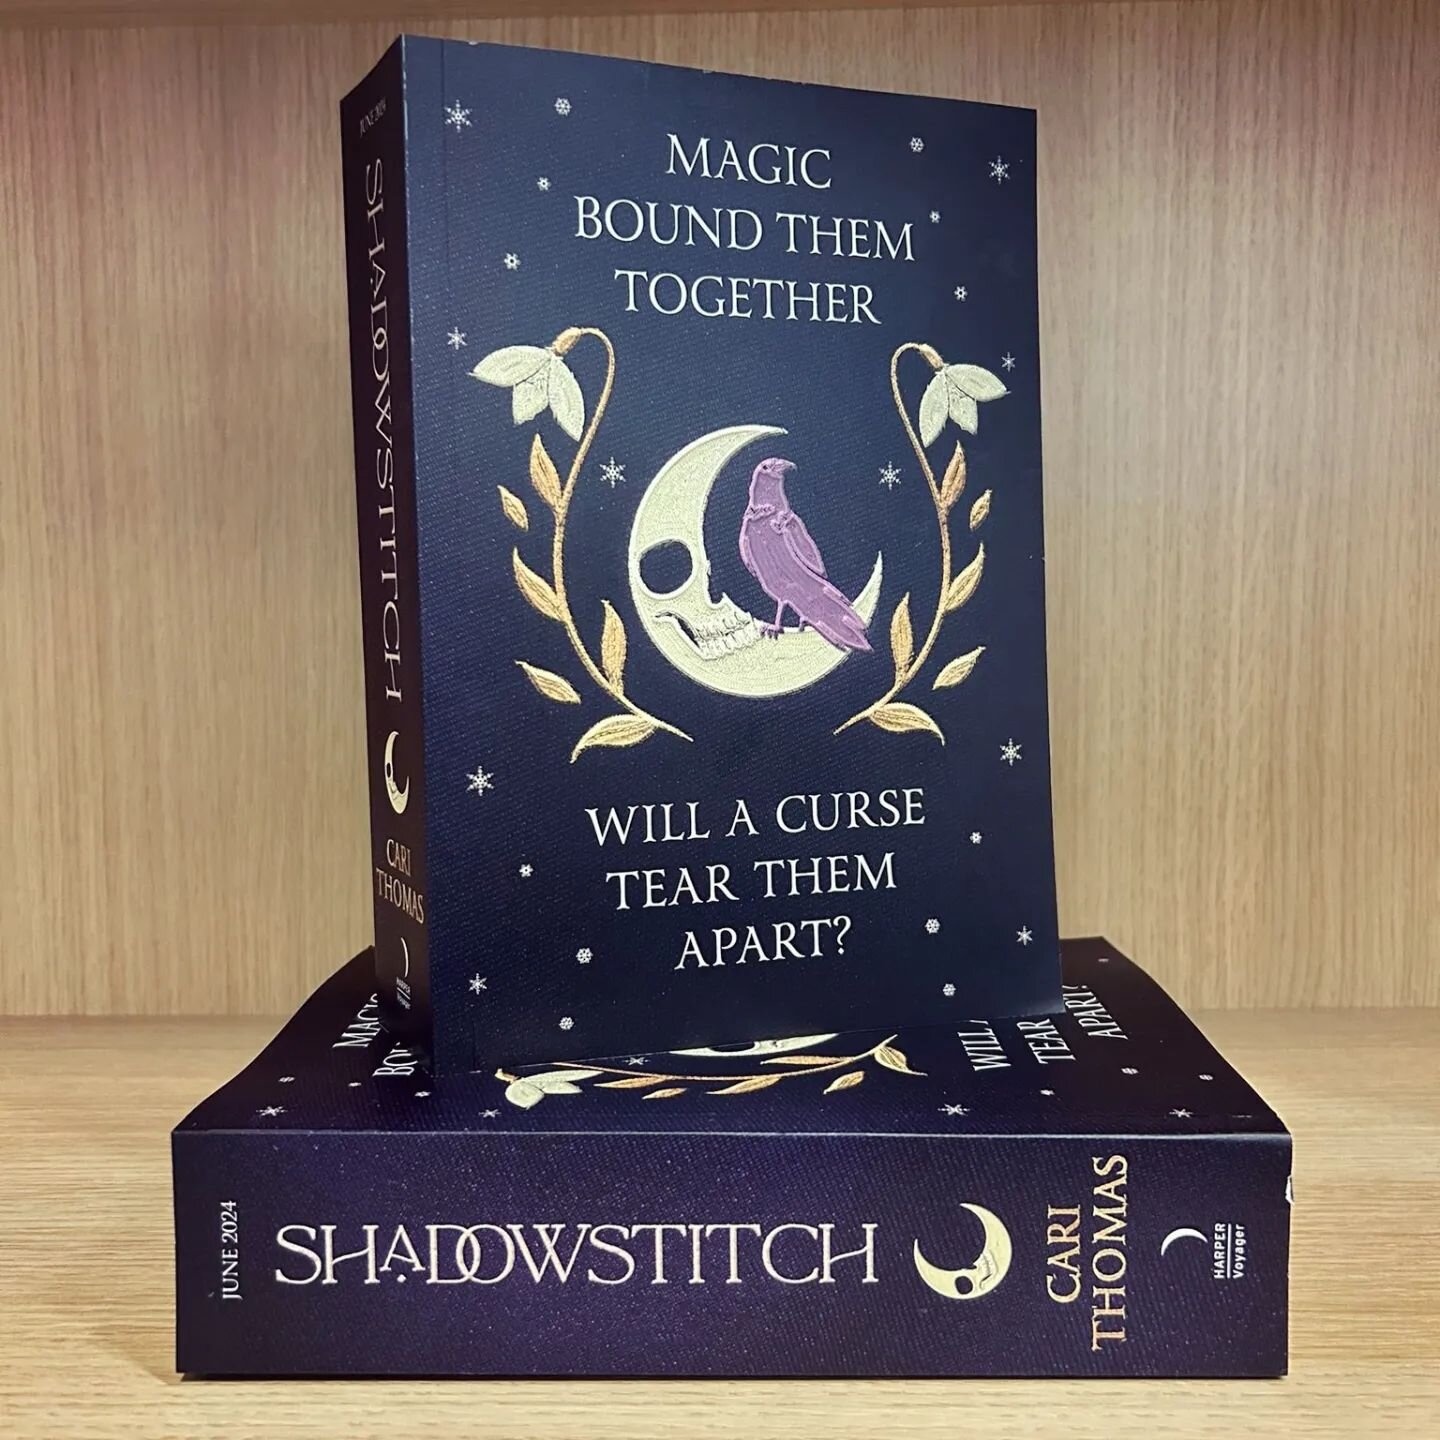 CAN'T WAIT TO HOLD ONE 💜💜💜

#Shadowstitchproof #Shadowstitch

.
.
.

#Threadneedle #bookquotes #ravens #witchpower #bookcover #bookcoverdesign #quotesgram #bookmagic #bookstagram #harpervoyager #witchesofig #fantasyfiction #magic #urbanfantasy #wi